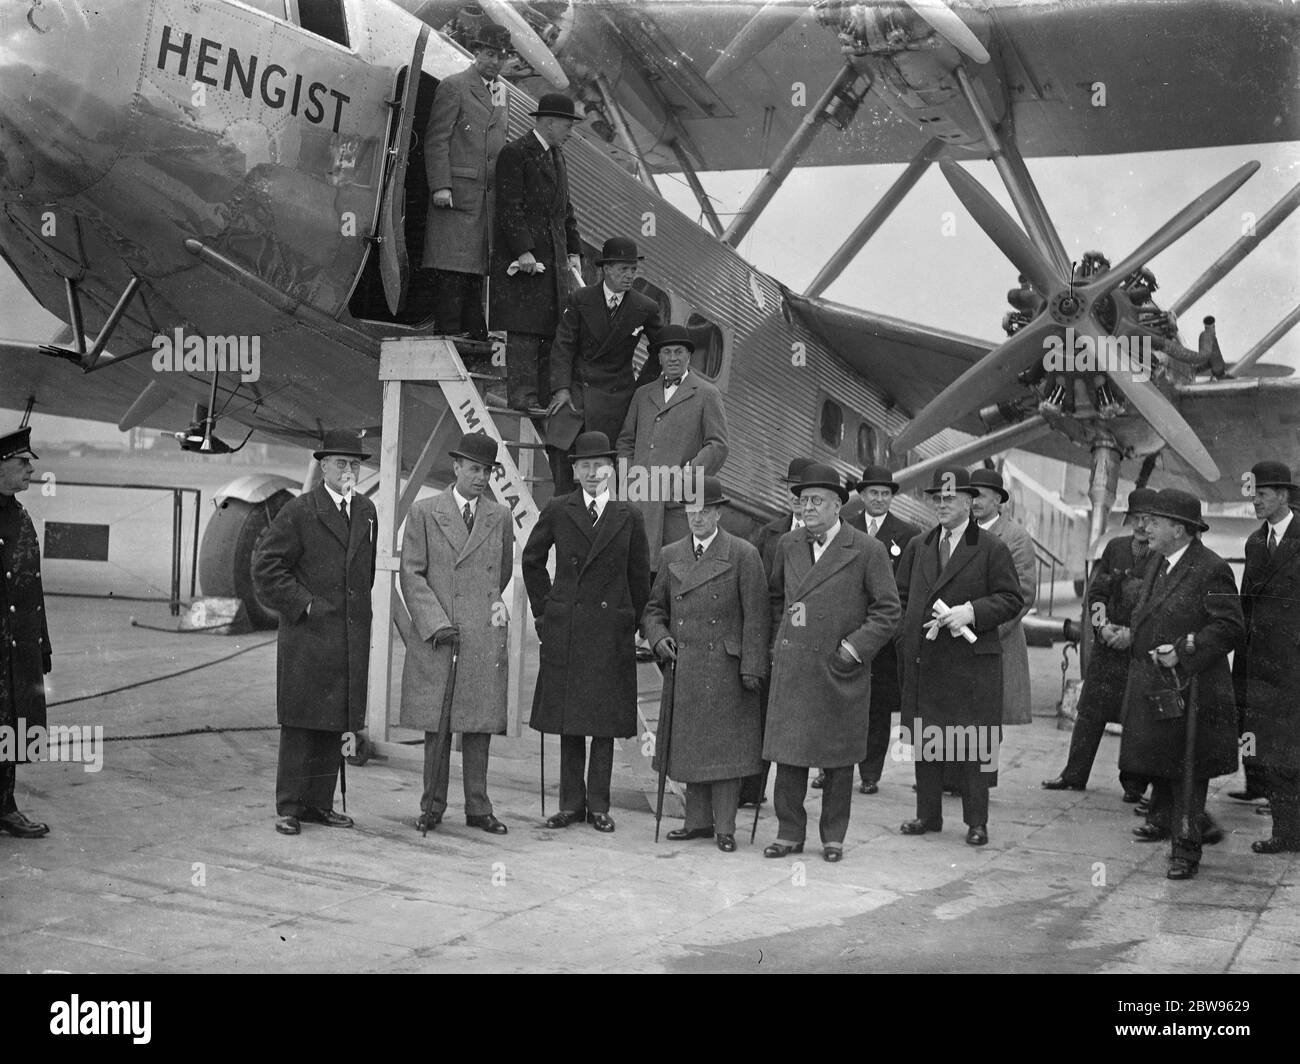 Argentine delegation make official visit to Croydon Aerodrome . The Argentine delegation led by Dr Roca , Vice President of the Argentine paid an official visit to Croydon Aerodrome where a special display was put on for their benefit . The Marquis of Londonderry , Minister for Air , with Dr Roca and members of the delegation beside one of the giant Hannibal planes at Croydon during the visit of inspection . 11 February 1933 Stock Photo